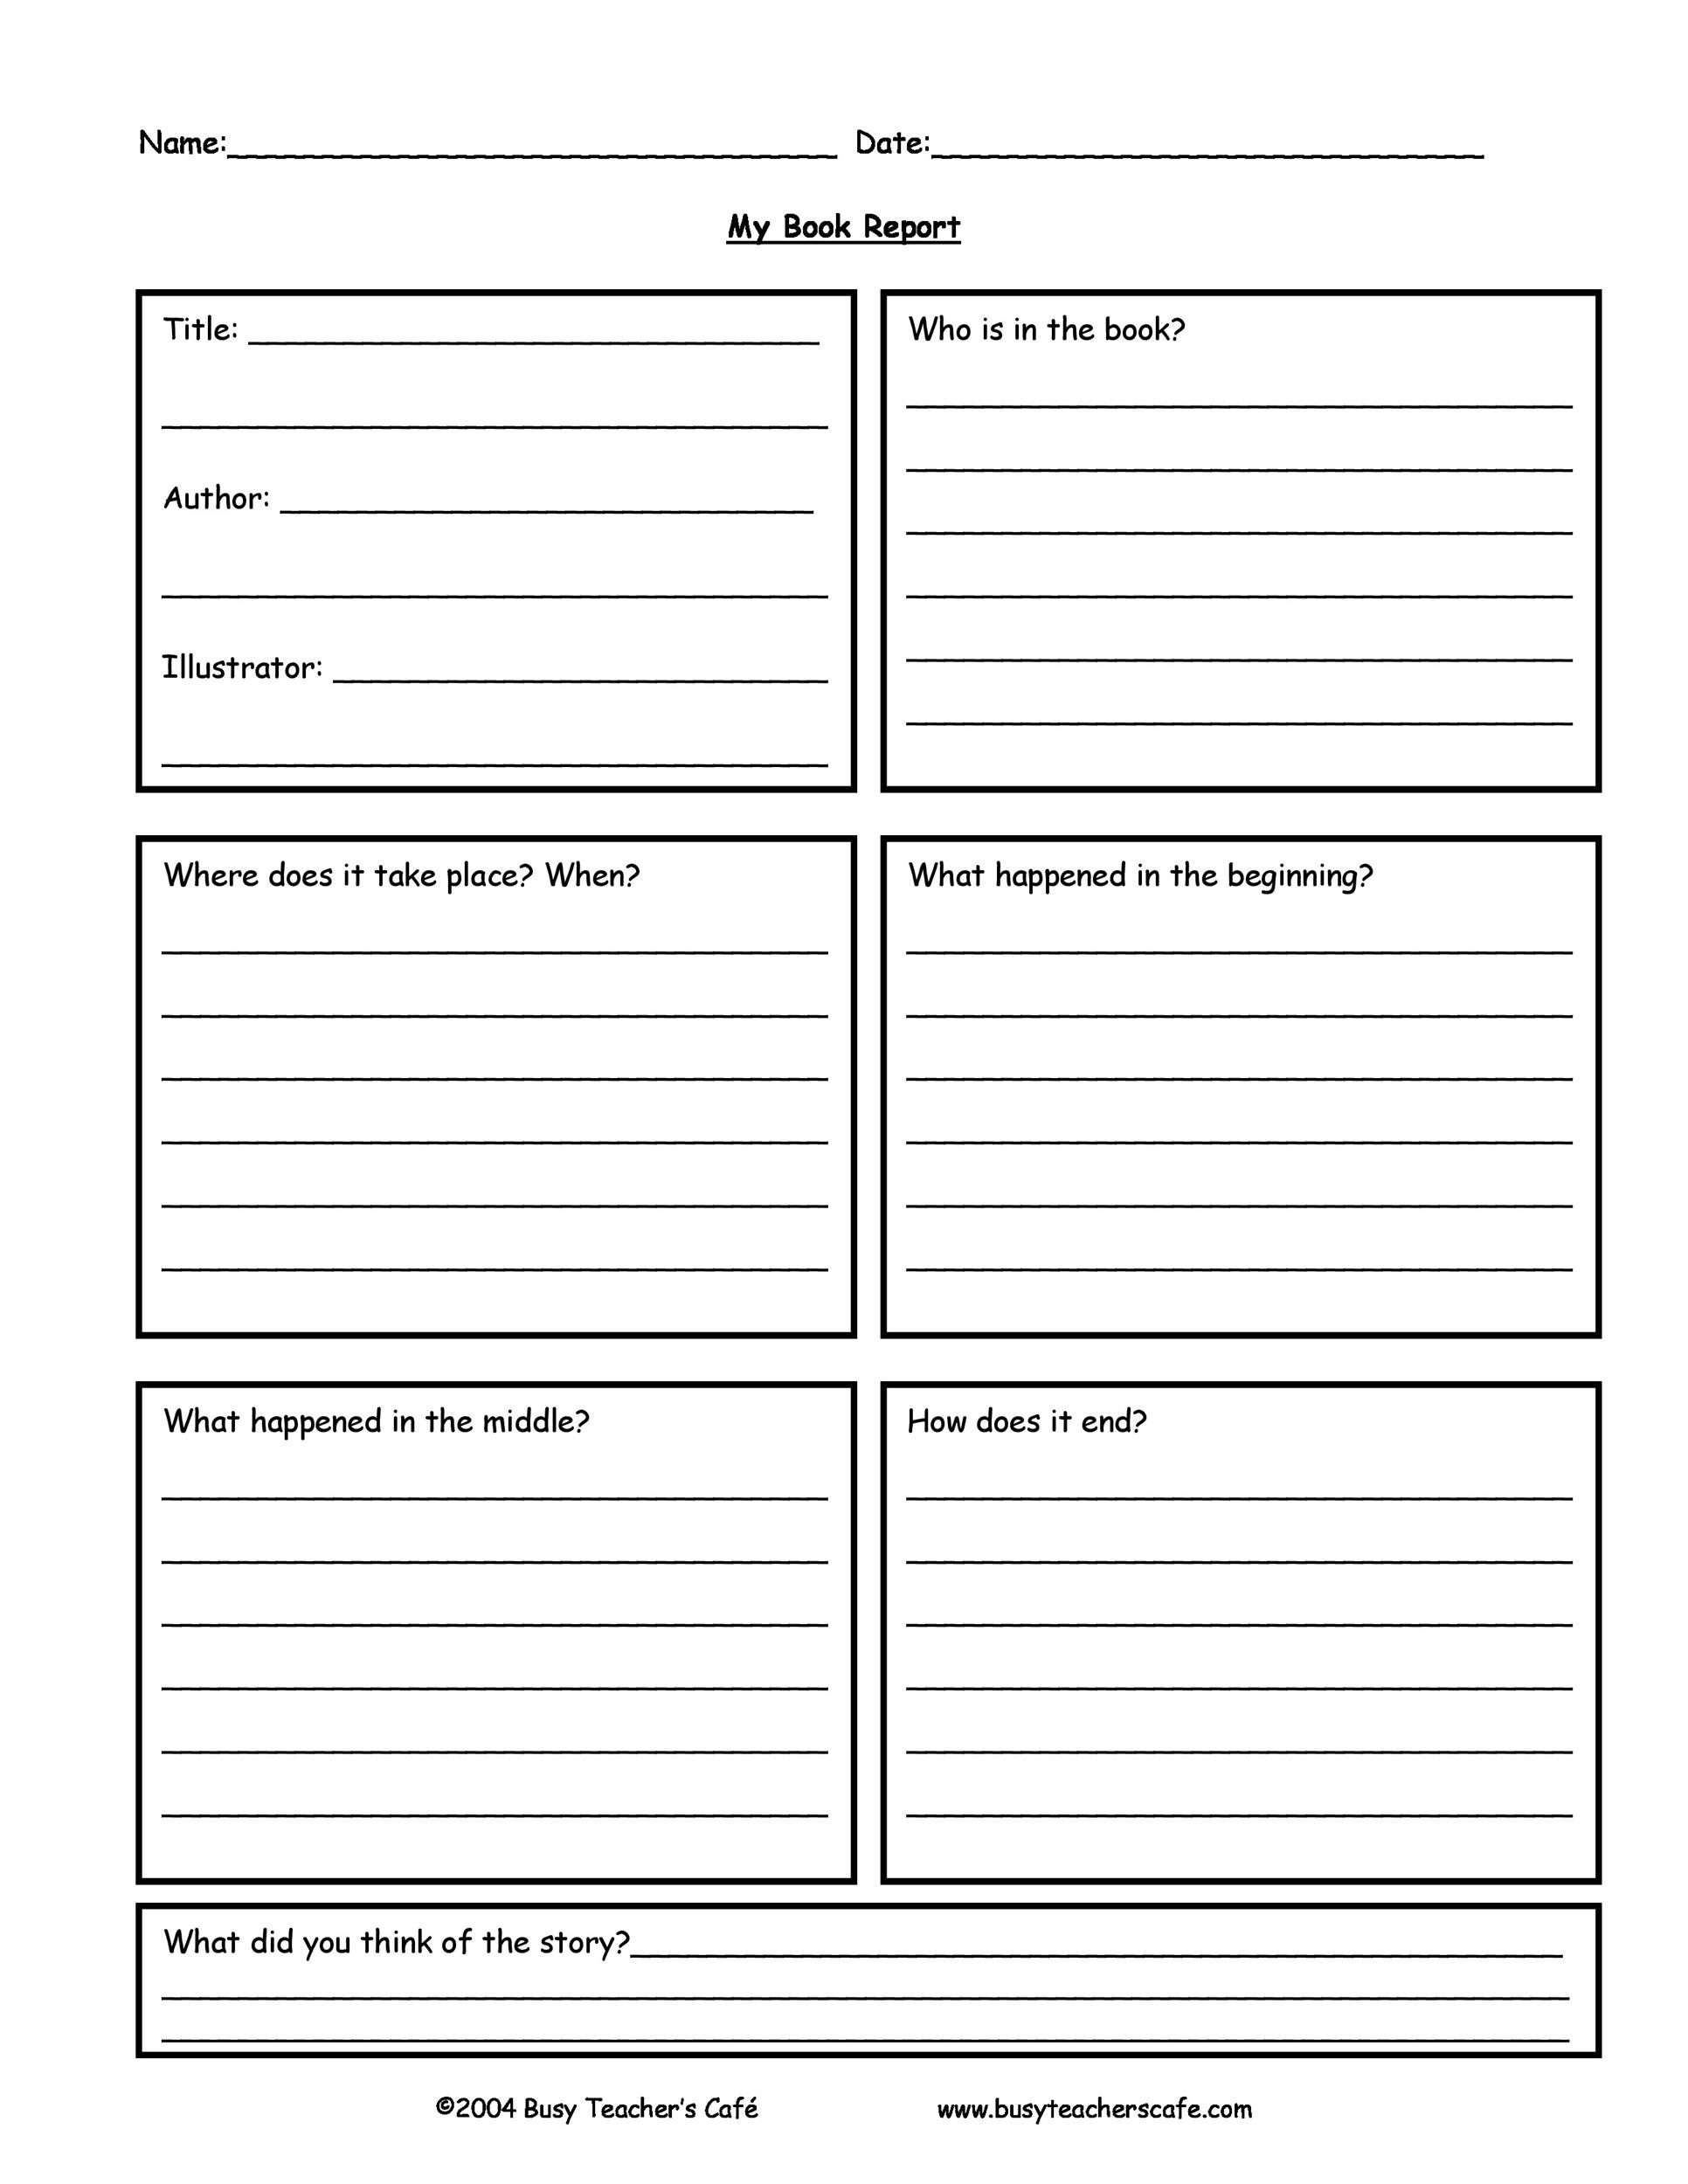 abc book template for middle school With Middle School Book Report Template